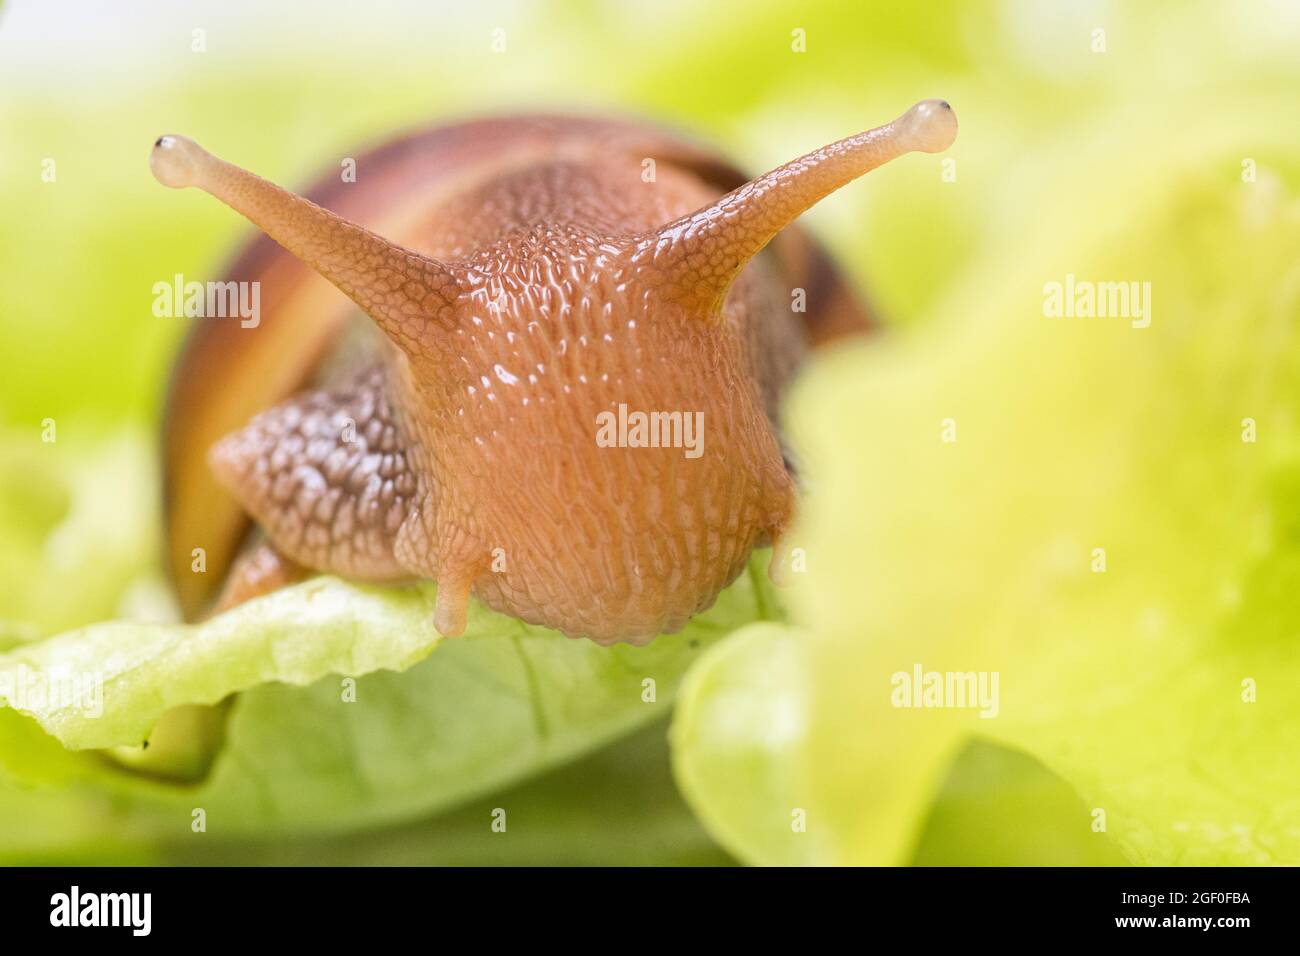 The small Achatina snail eats a leaf of lettuce or grass, Snail in nature, close-up, selective focus, copy space. Can be used to illustrate the harm f Stock Photo